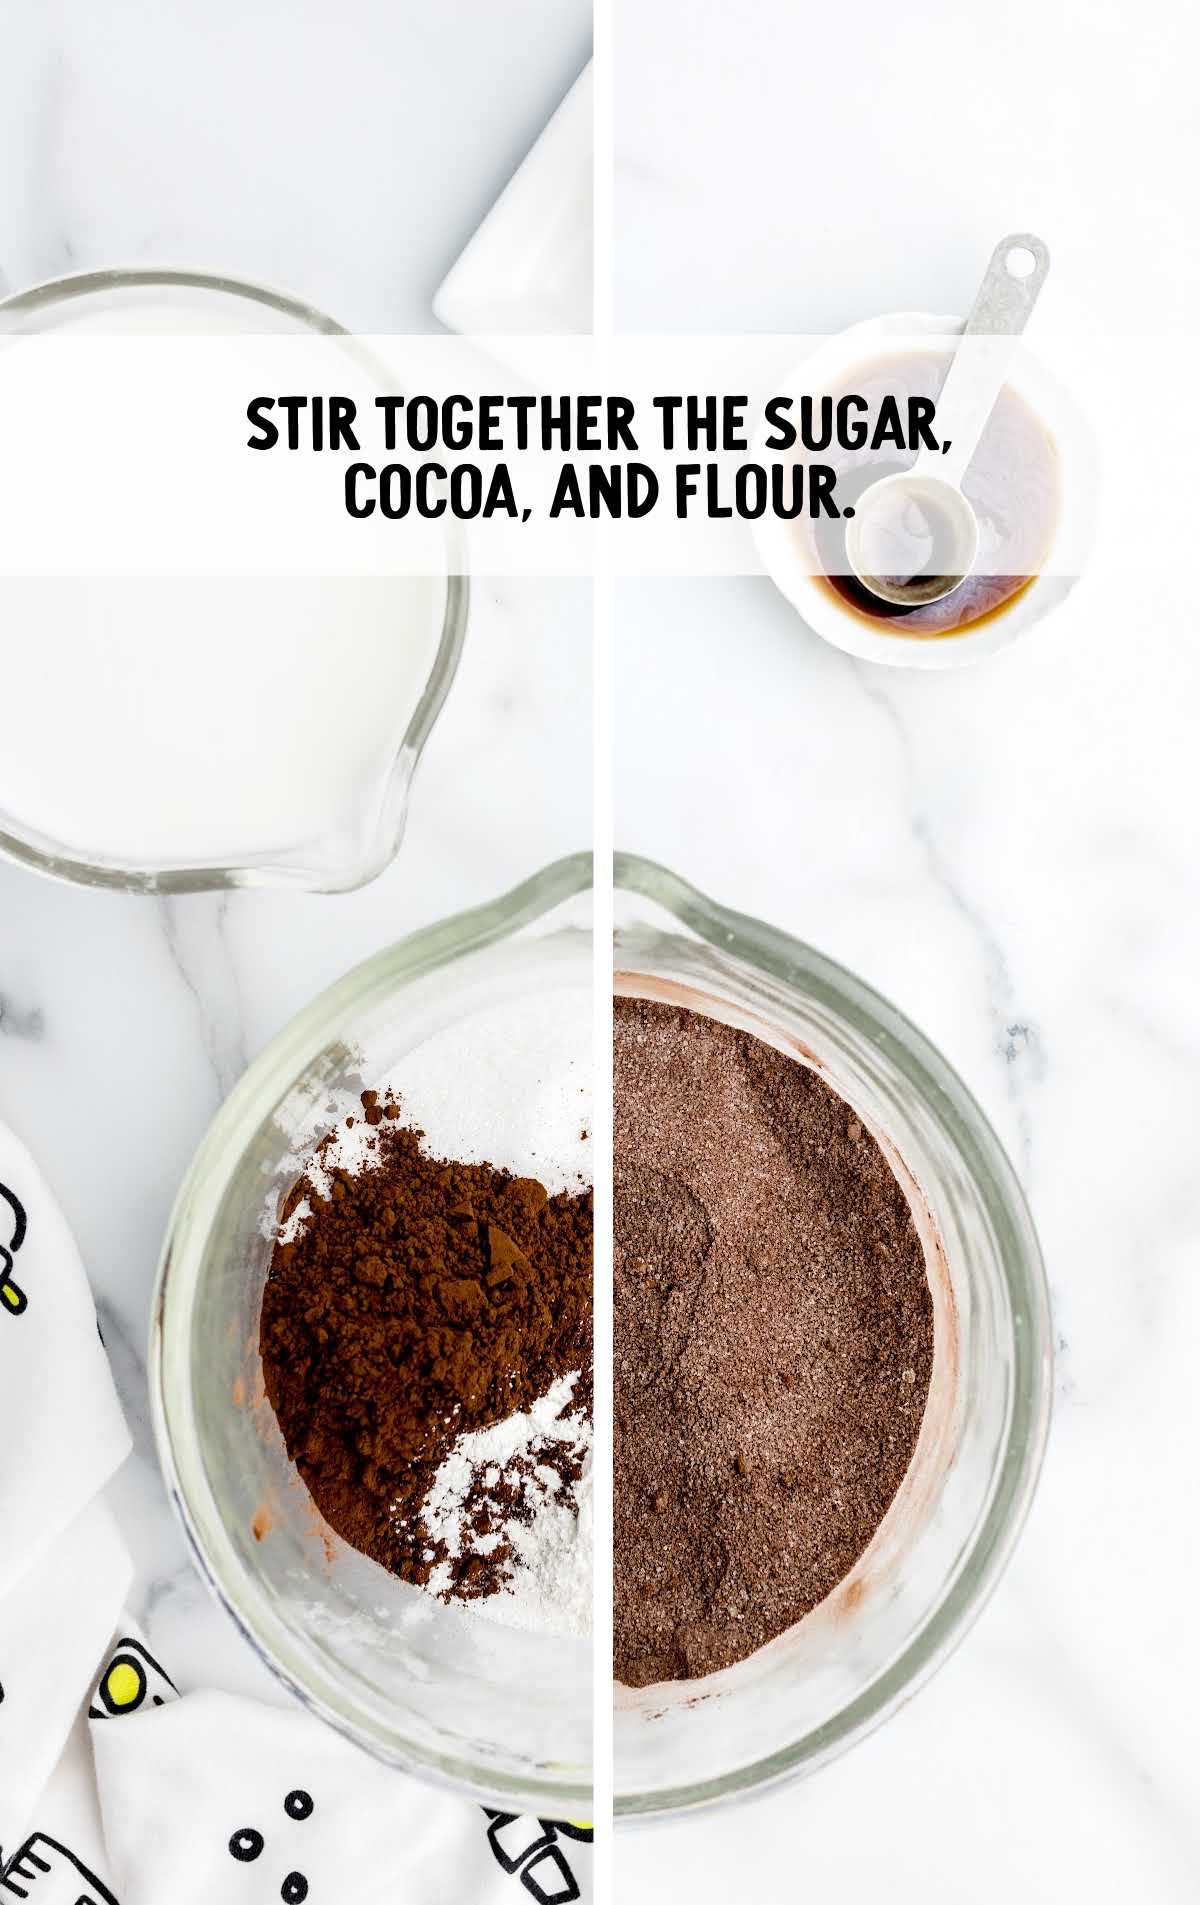 sugar, cocoa, and flour stirred together